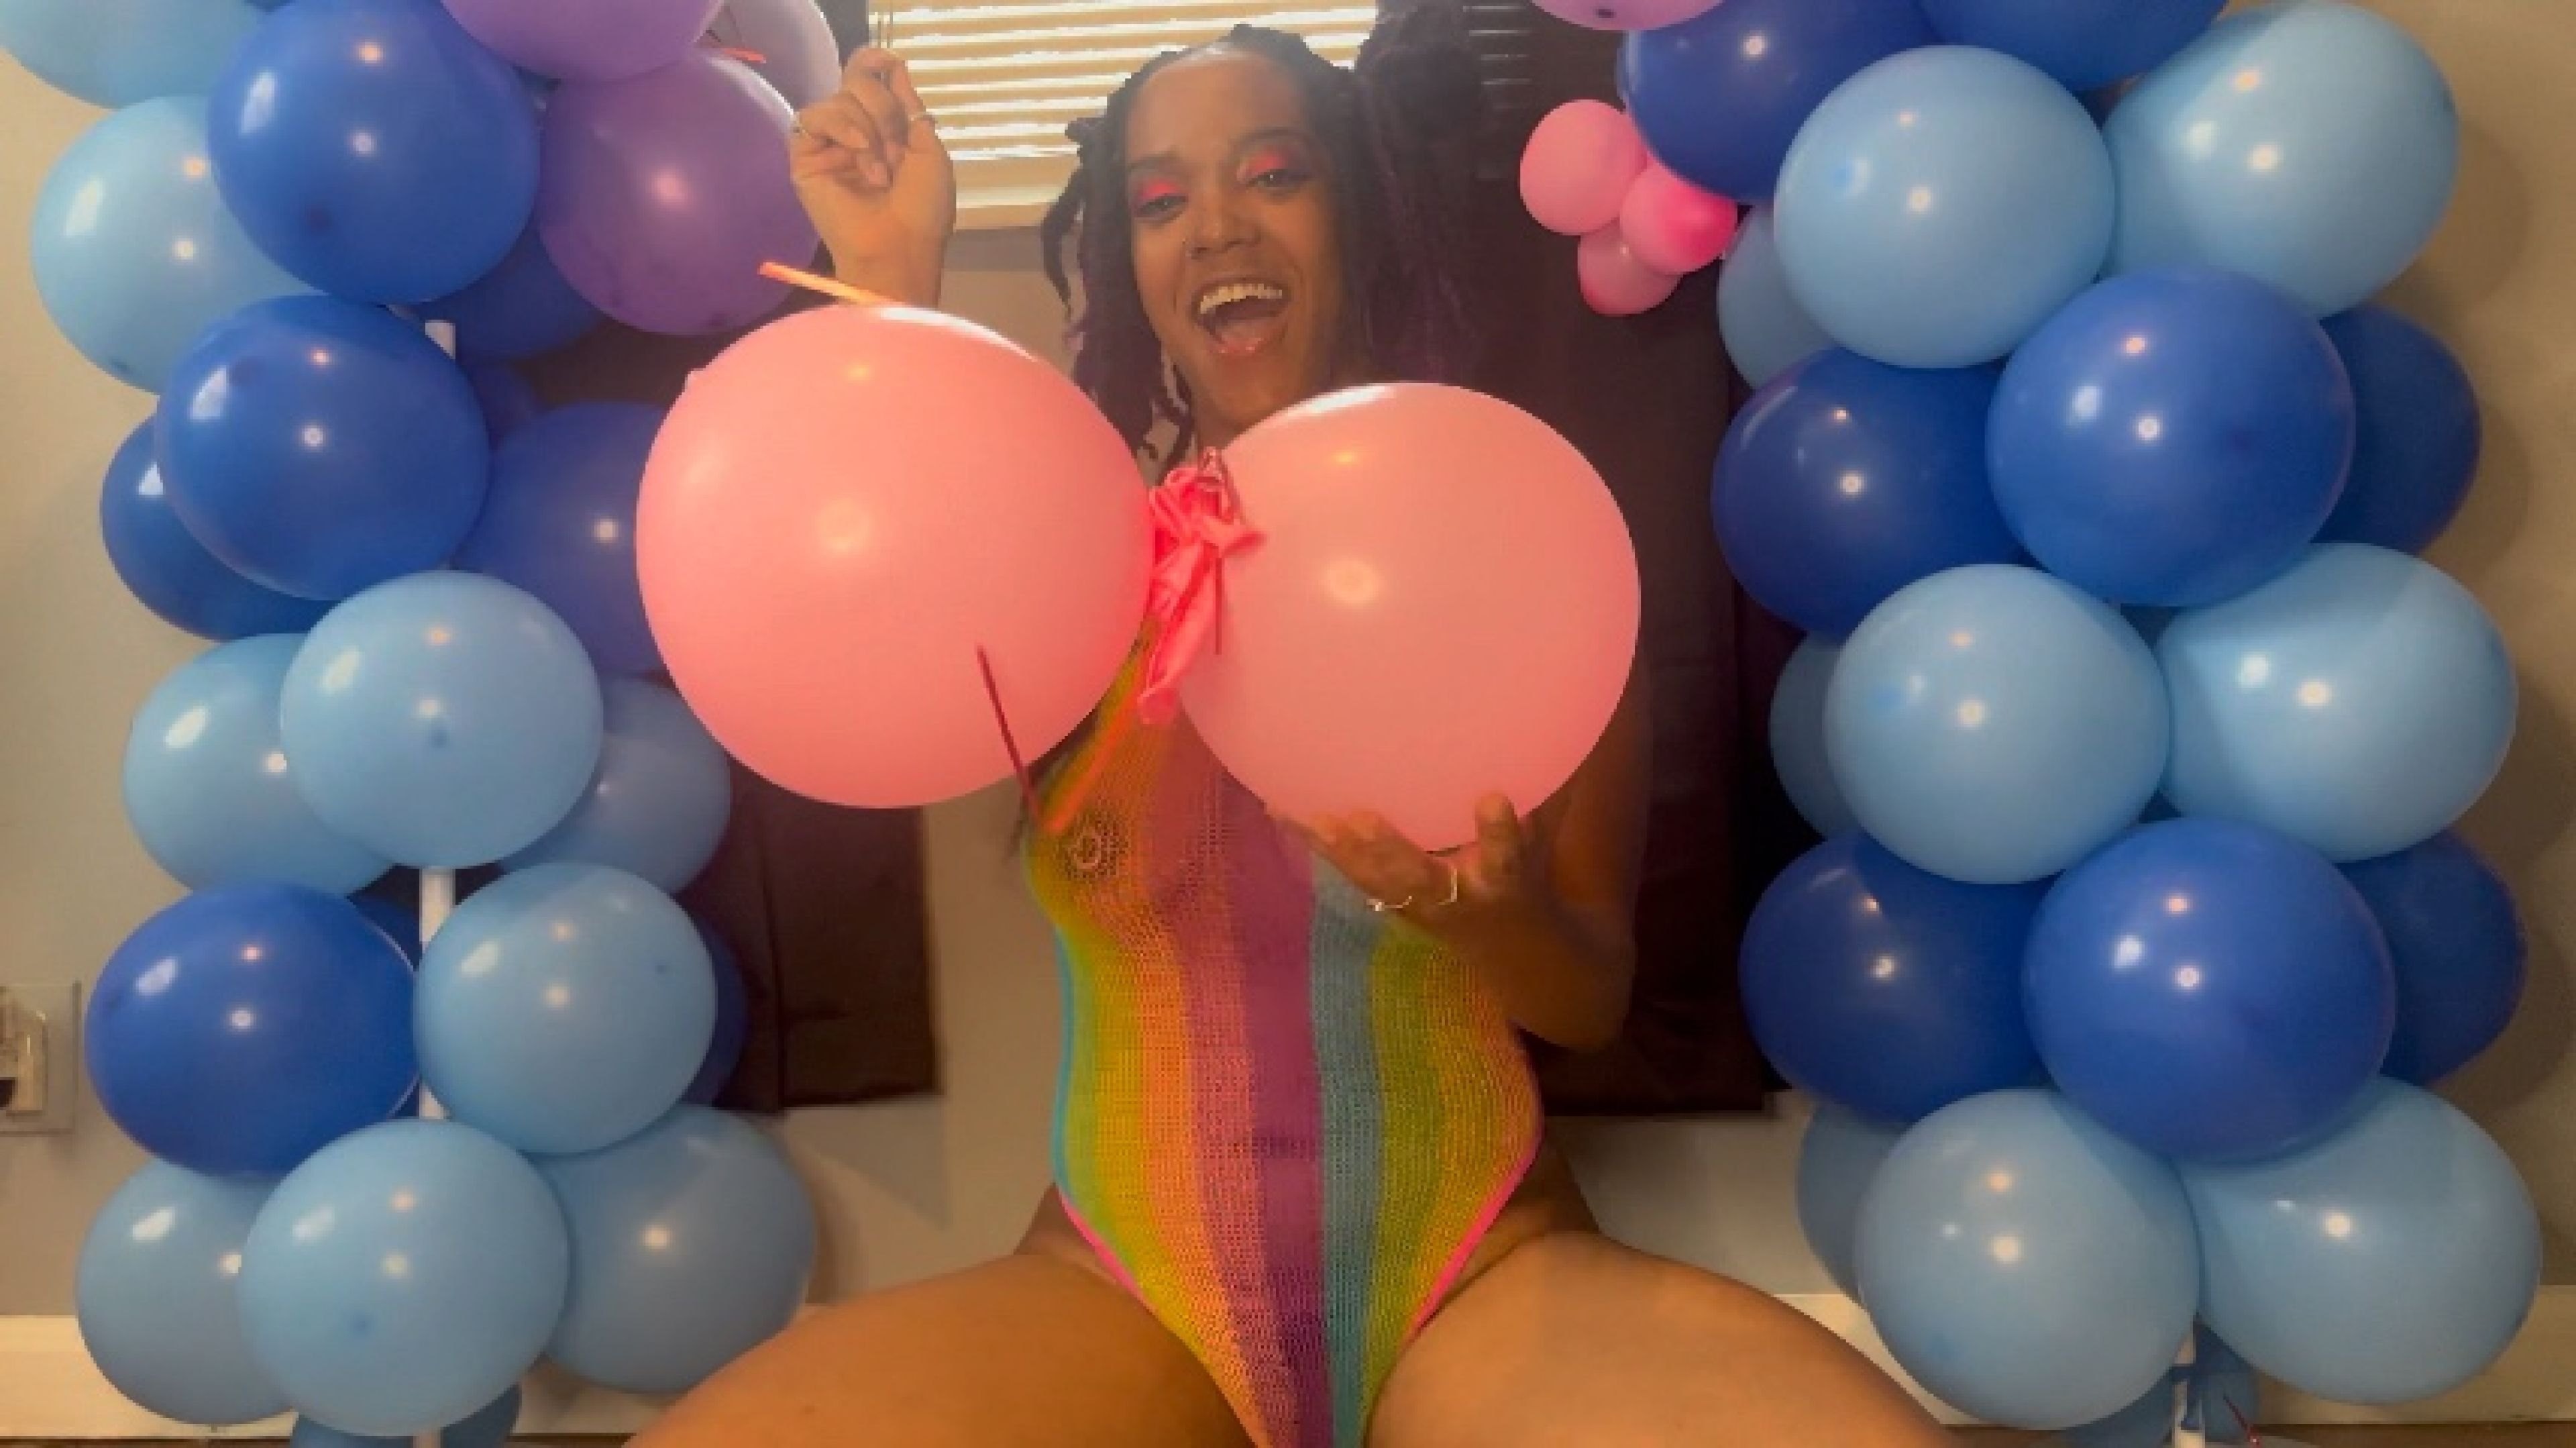 My first time balloon popping